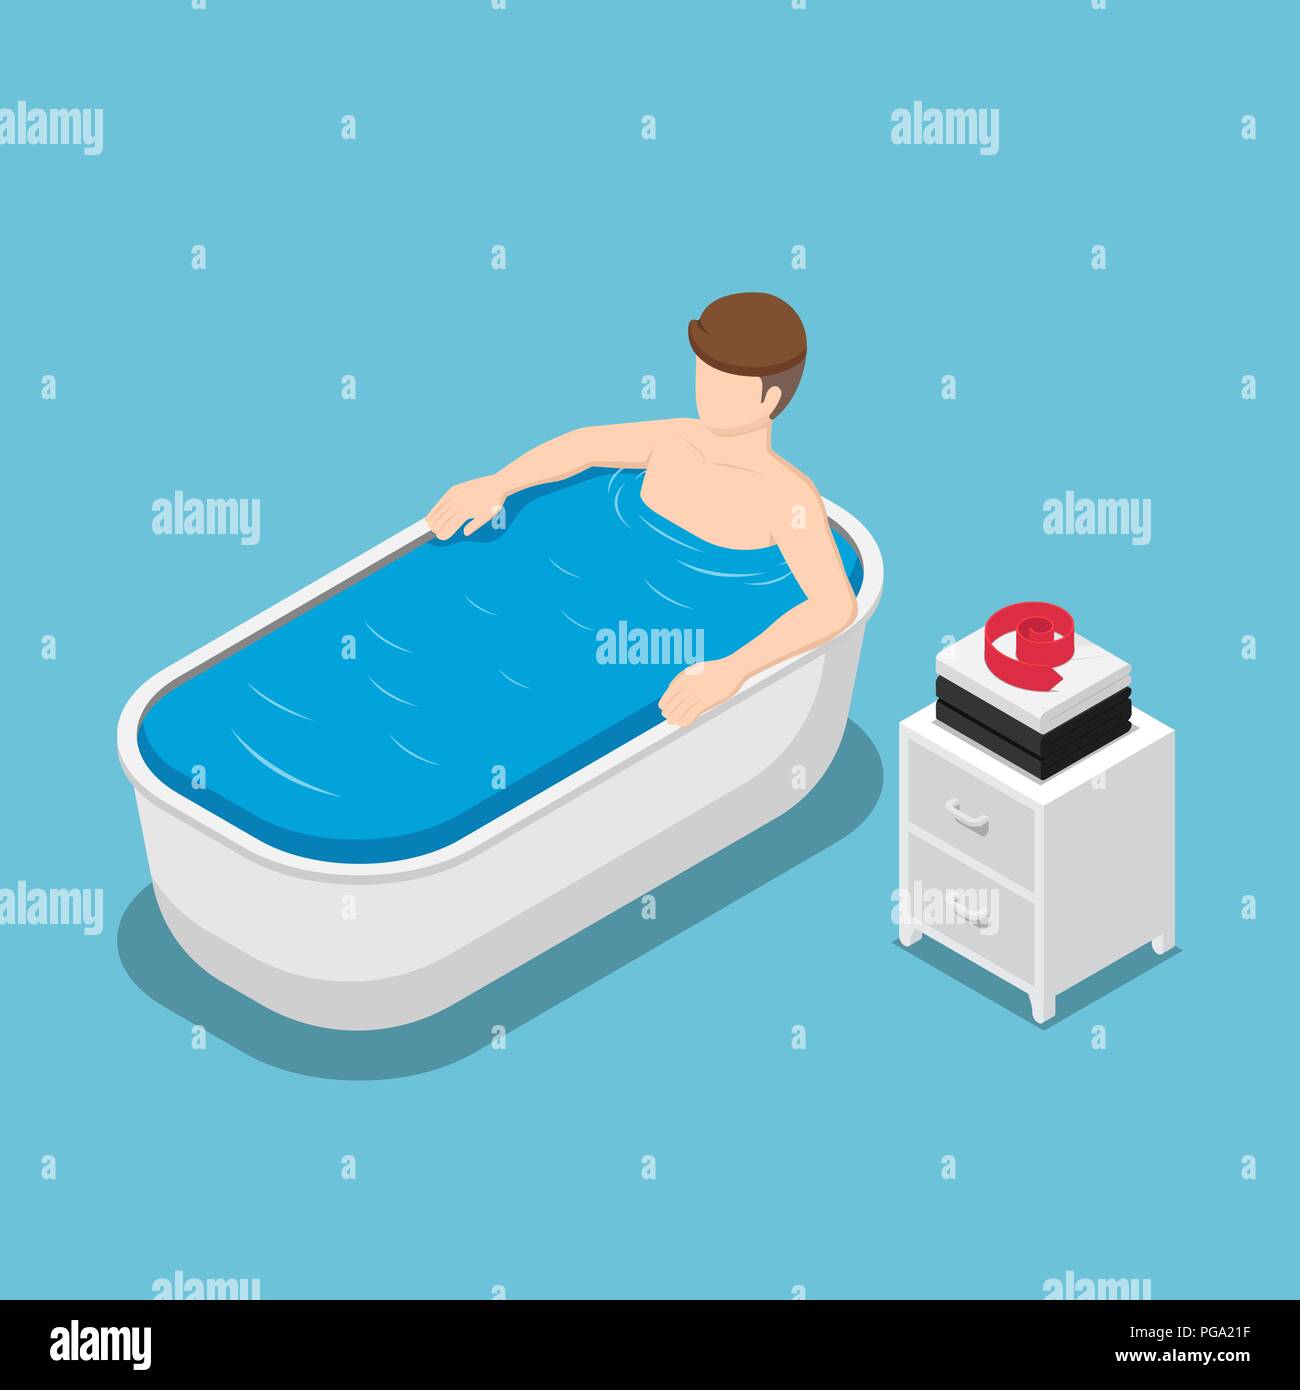 Flat 3d isometric businessman take a bath and relaxing in the bathtub. Relax concept. Stock Vector